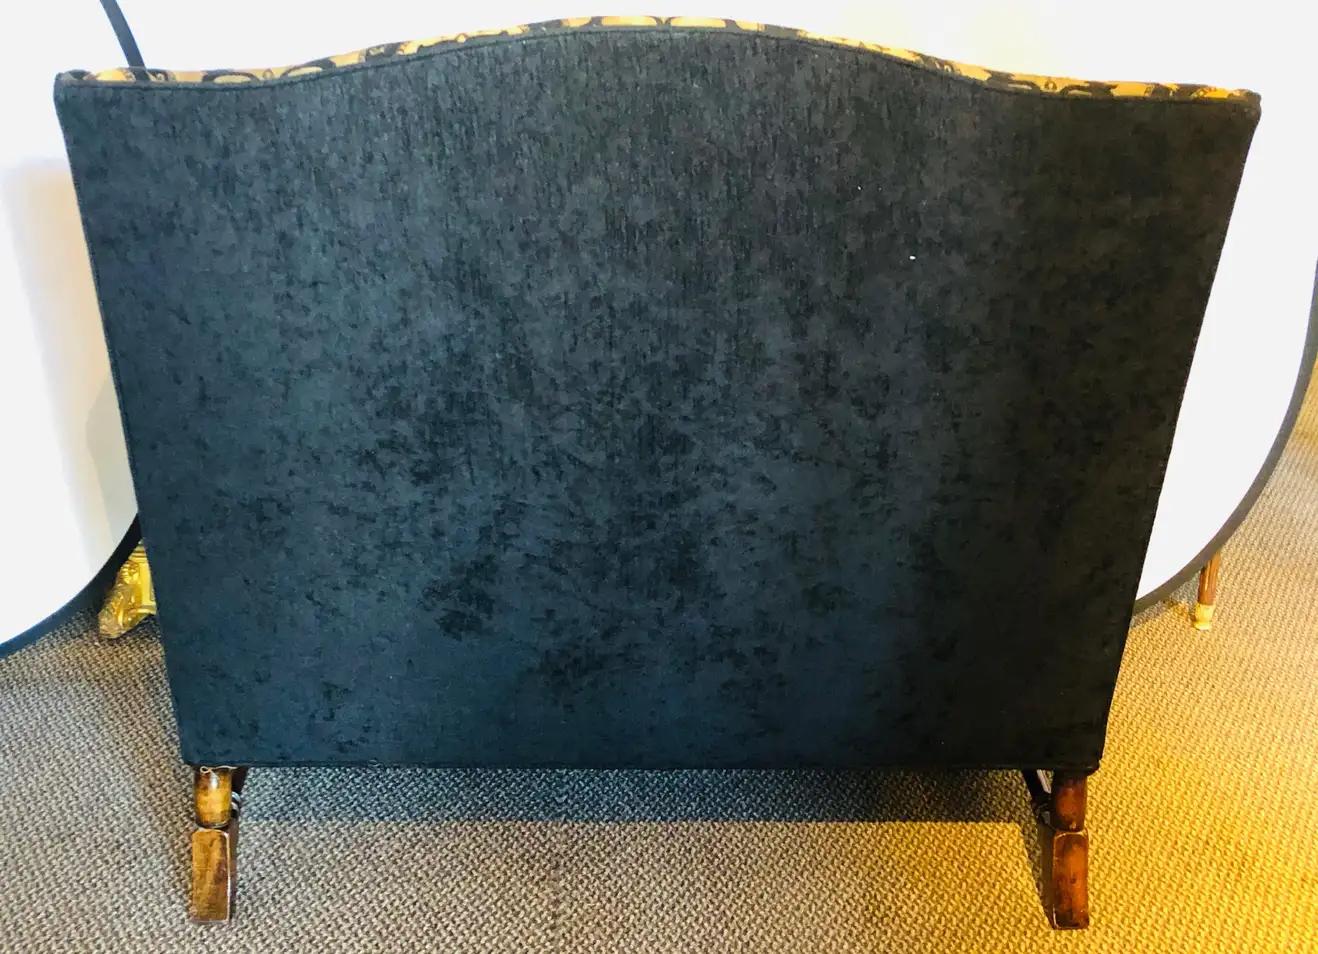 Italian Rococo Revival Style Settee or Sofa with Heraldic Motif in Black & Beige For Sale 5